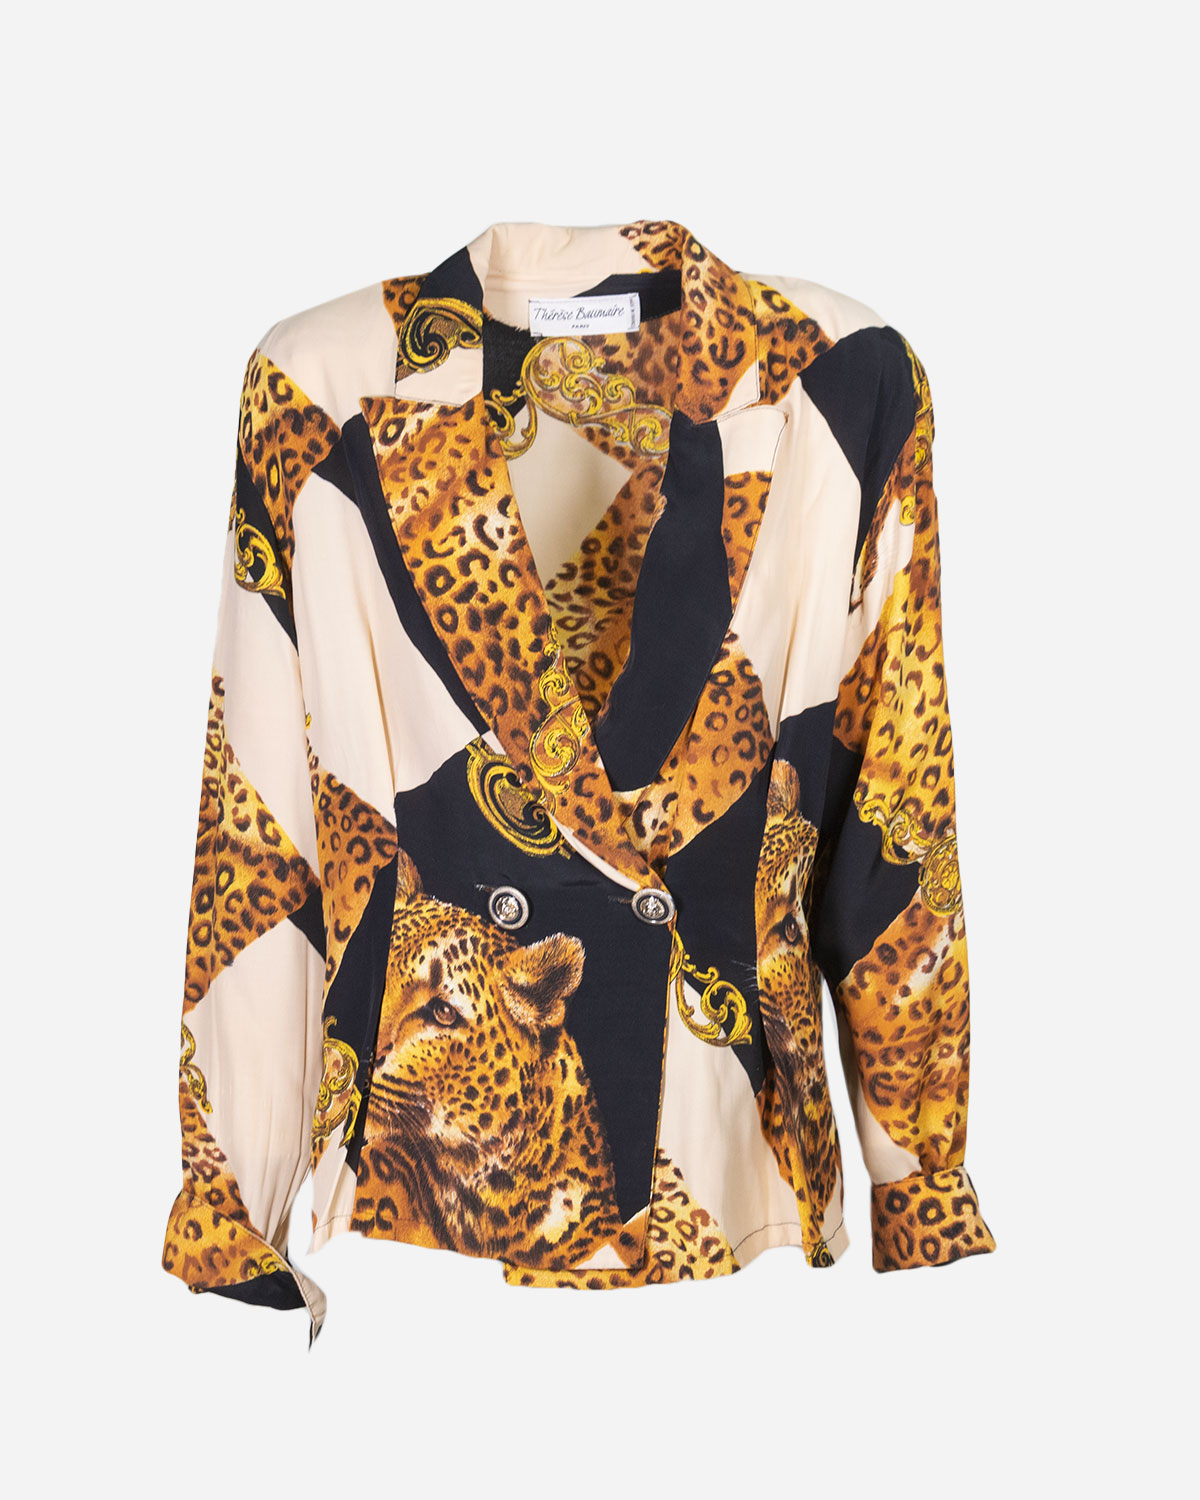 Baroque patterned shirts for women: 4 pieces